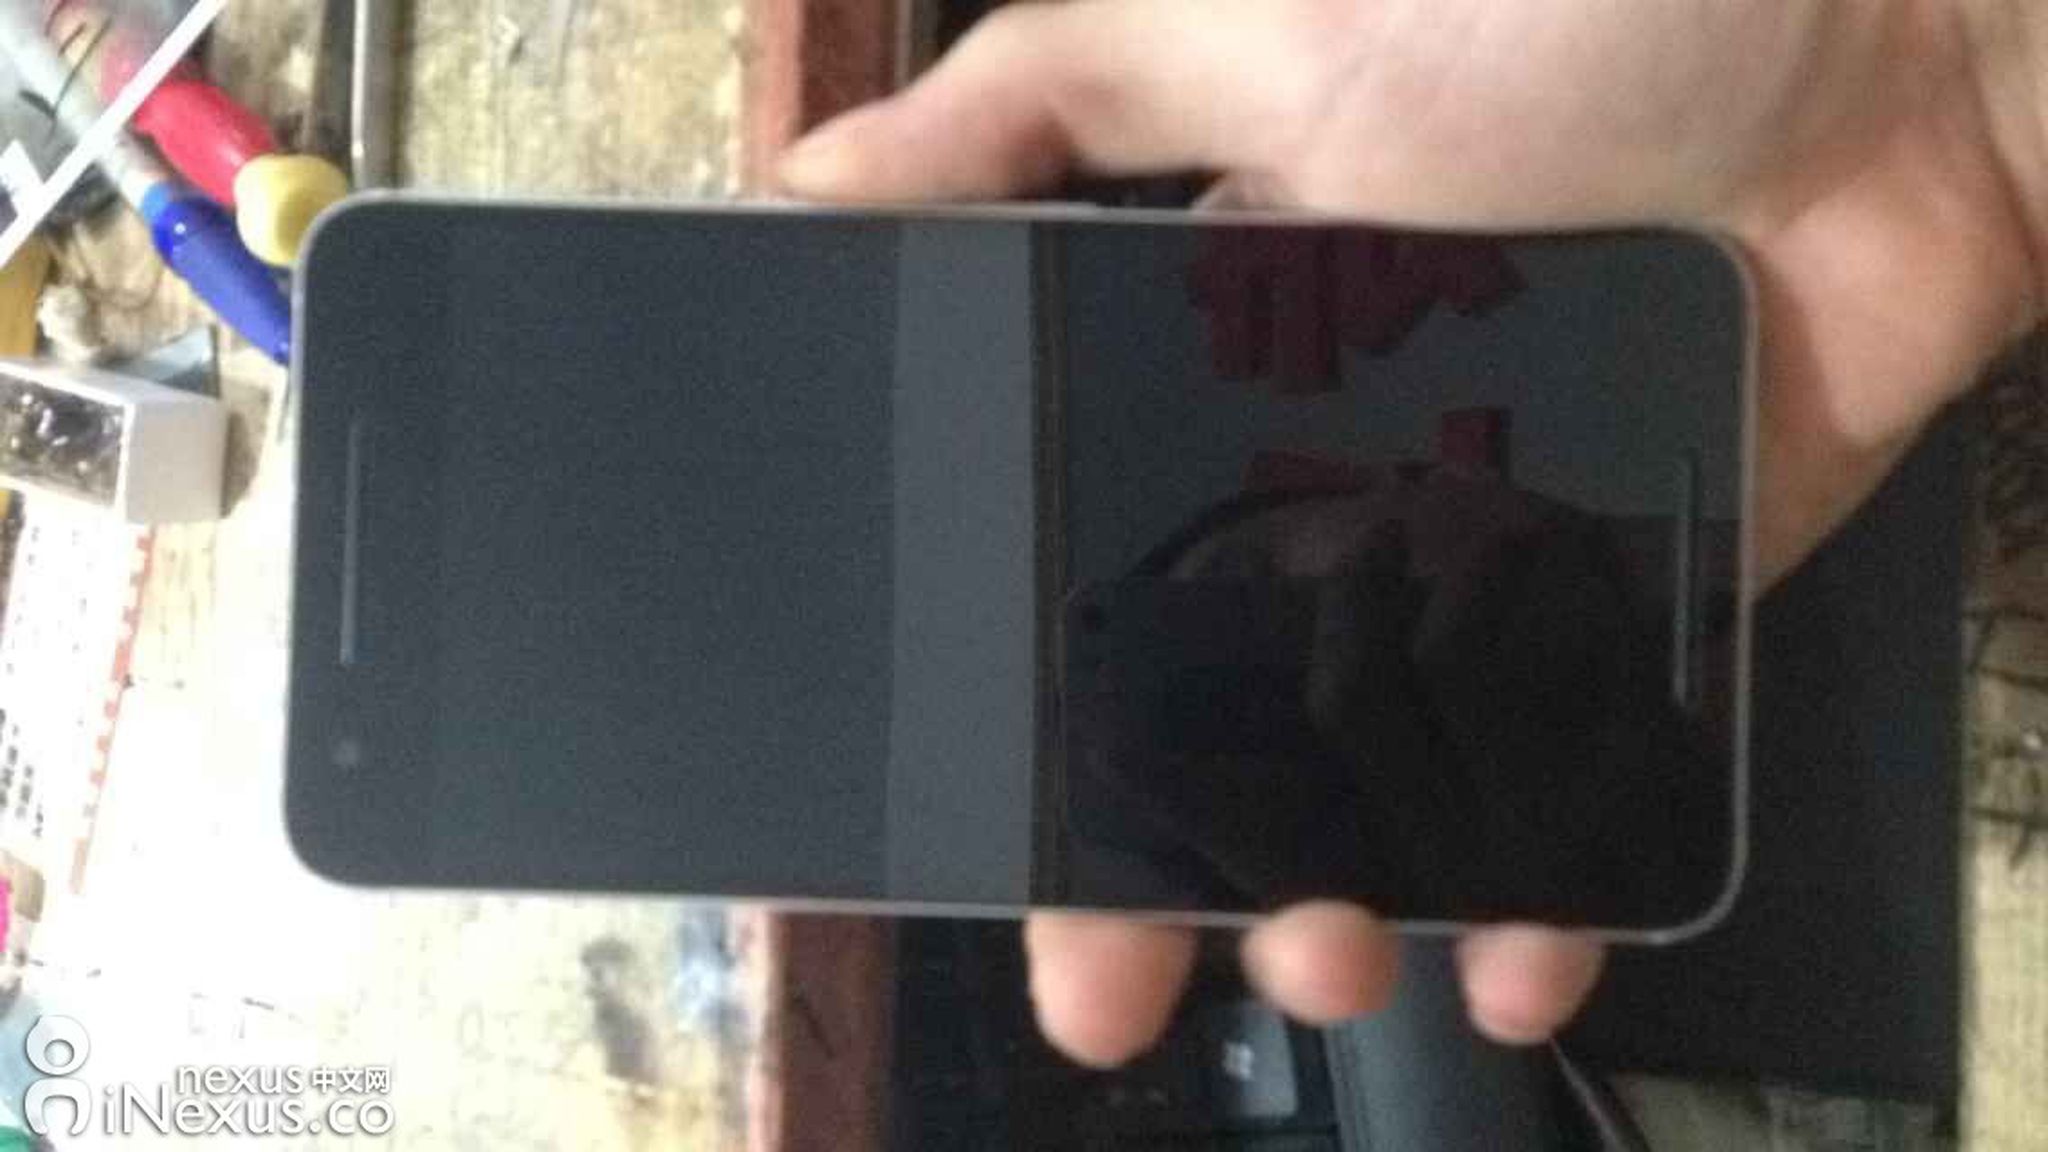 Leaked images reveal Huawei's Nexus with an unusual camera bump - The Verge